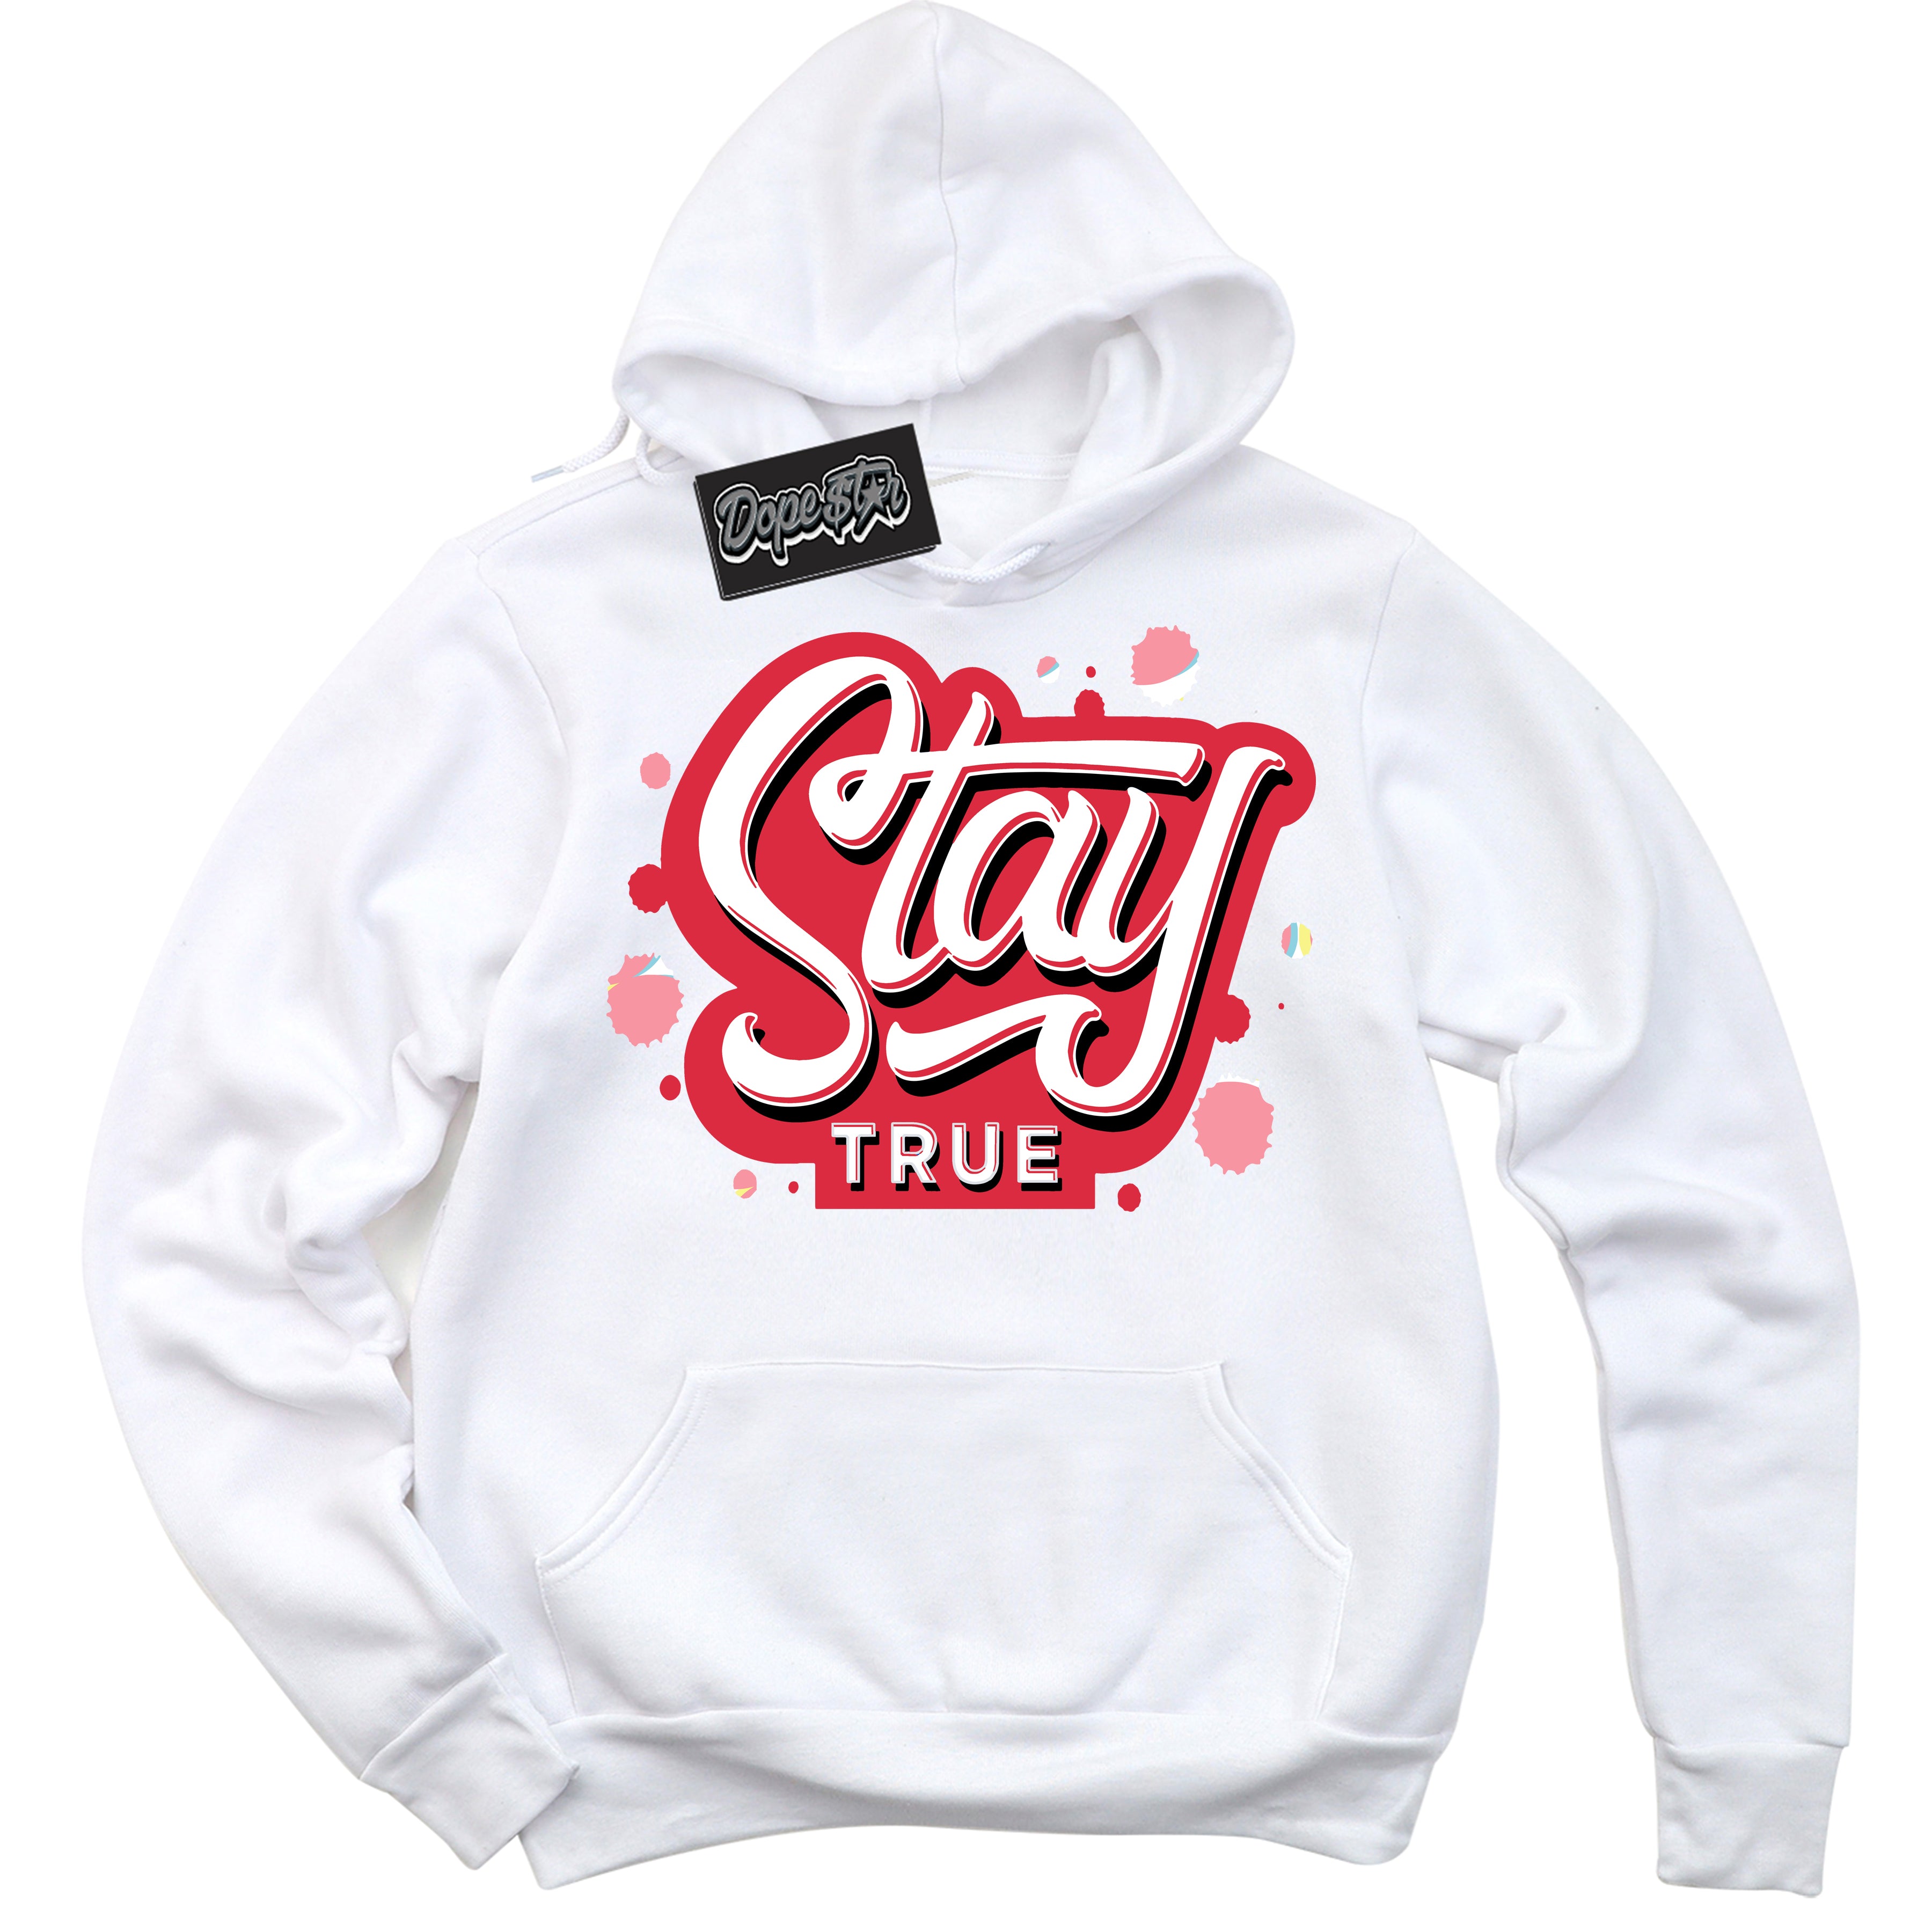 Cool White Graphic DopeStar Hoodie with “ Stay True “ print, that perfectly matches Spider-Verse 1s sneakers